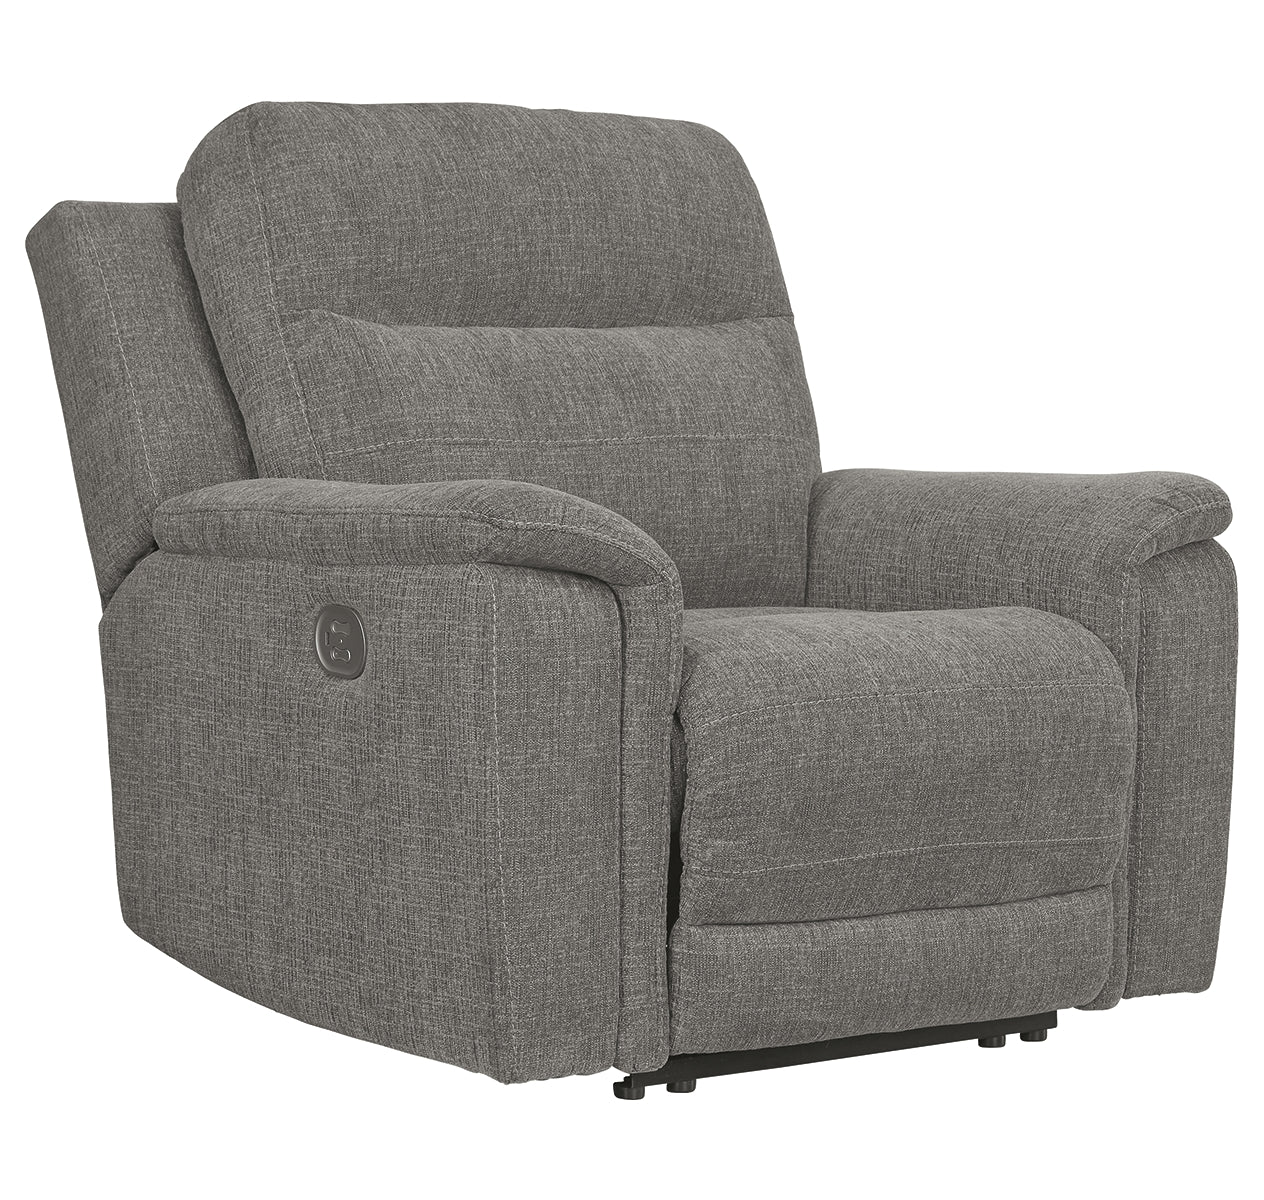 Mouttrie Sofa, Loveseat and Recliner